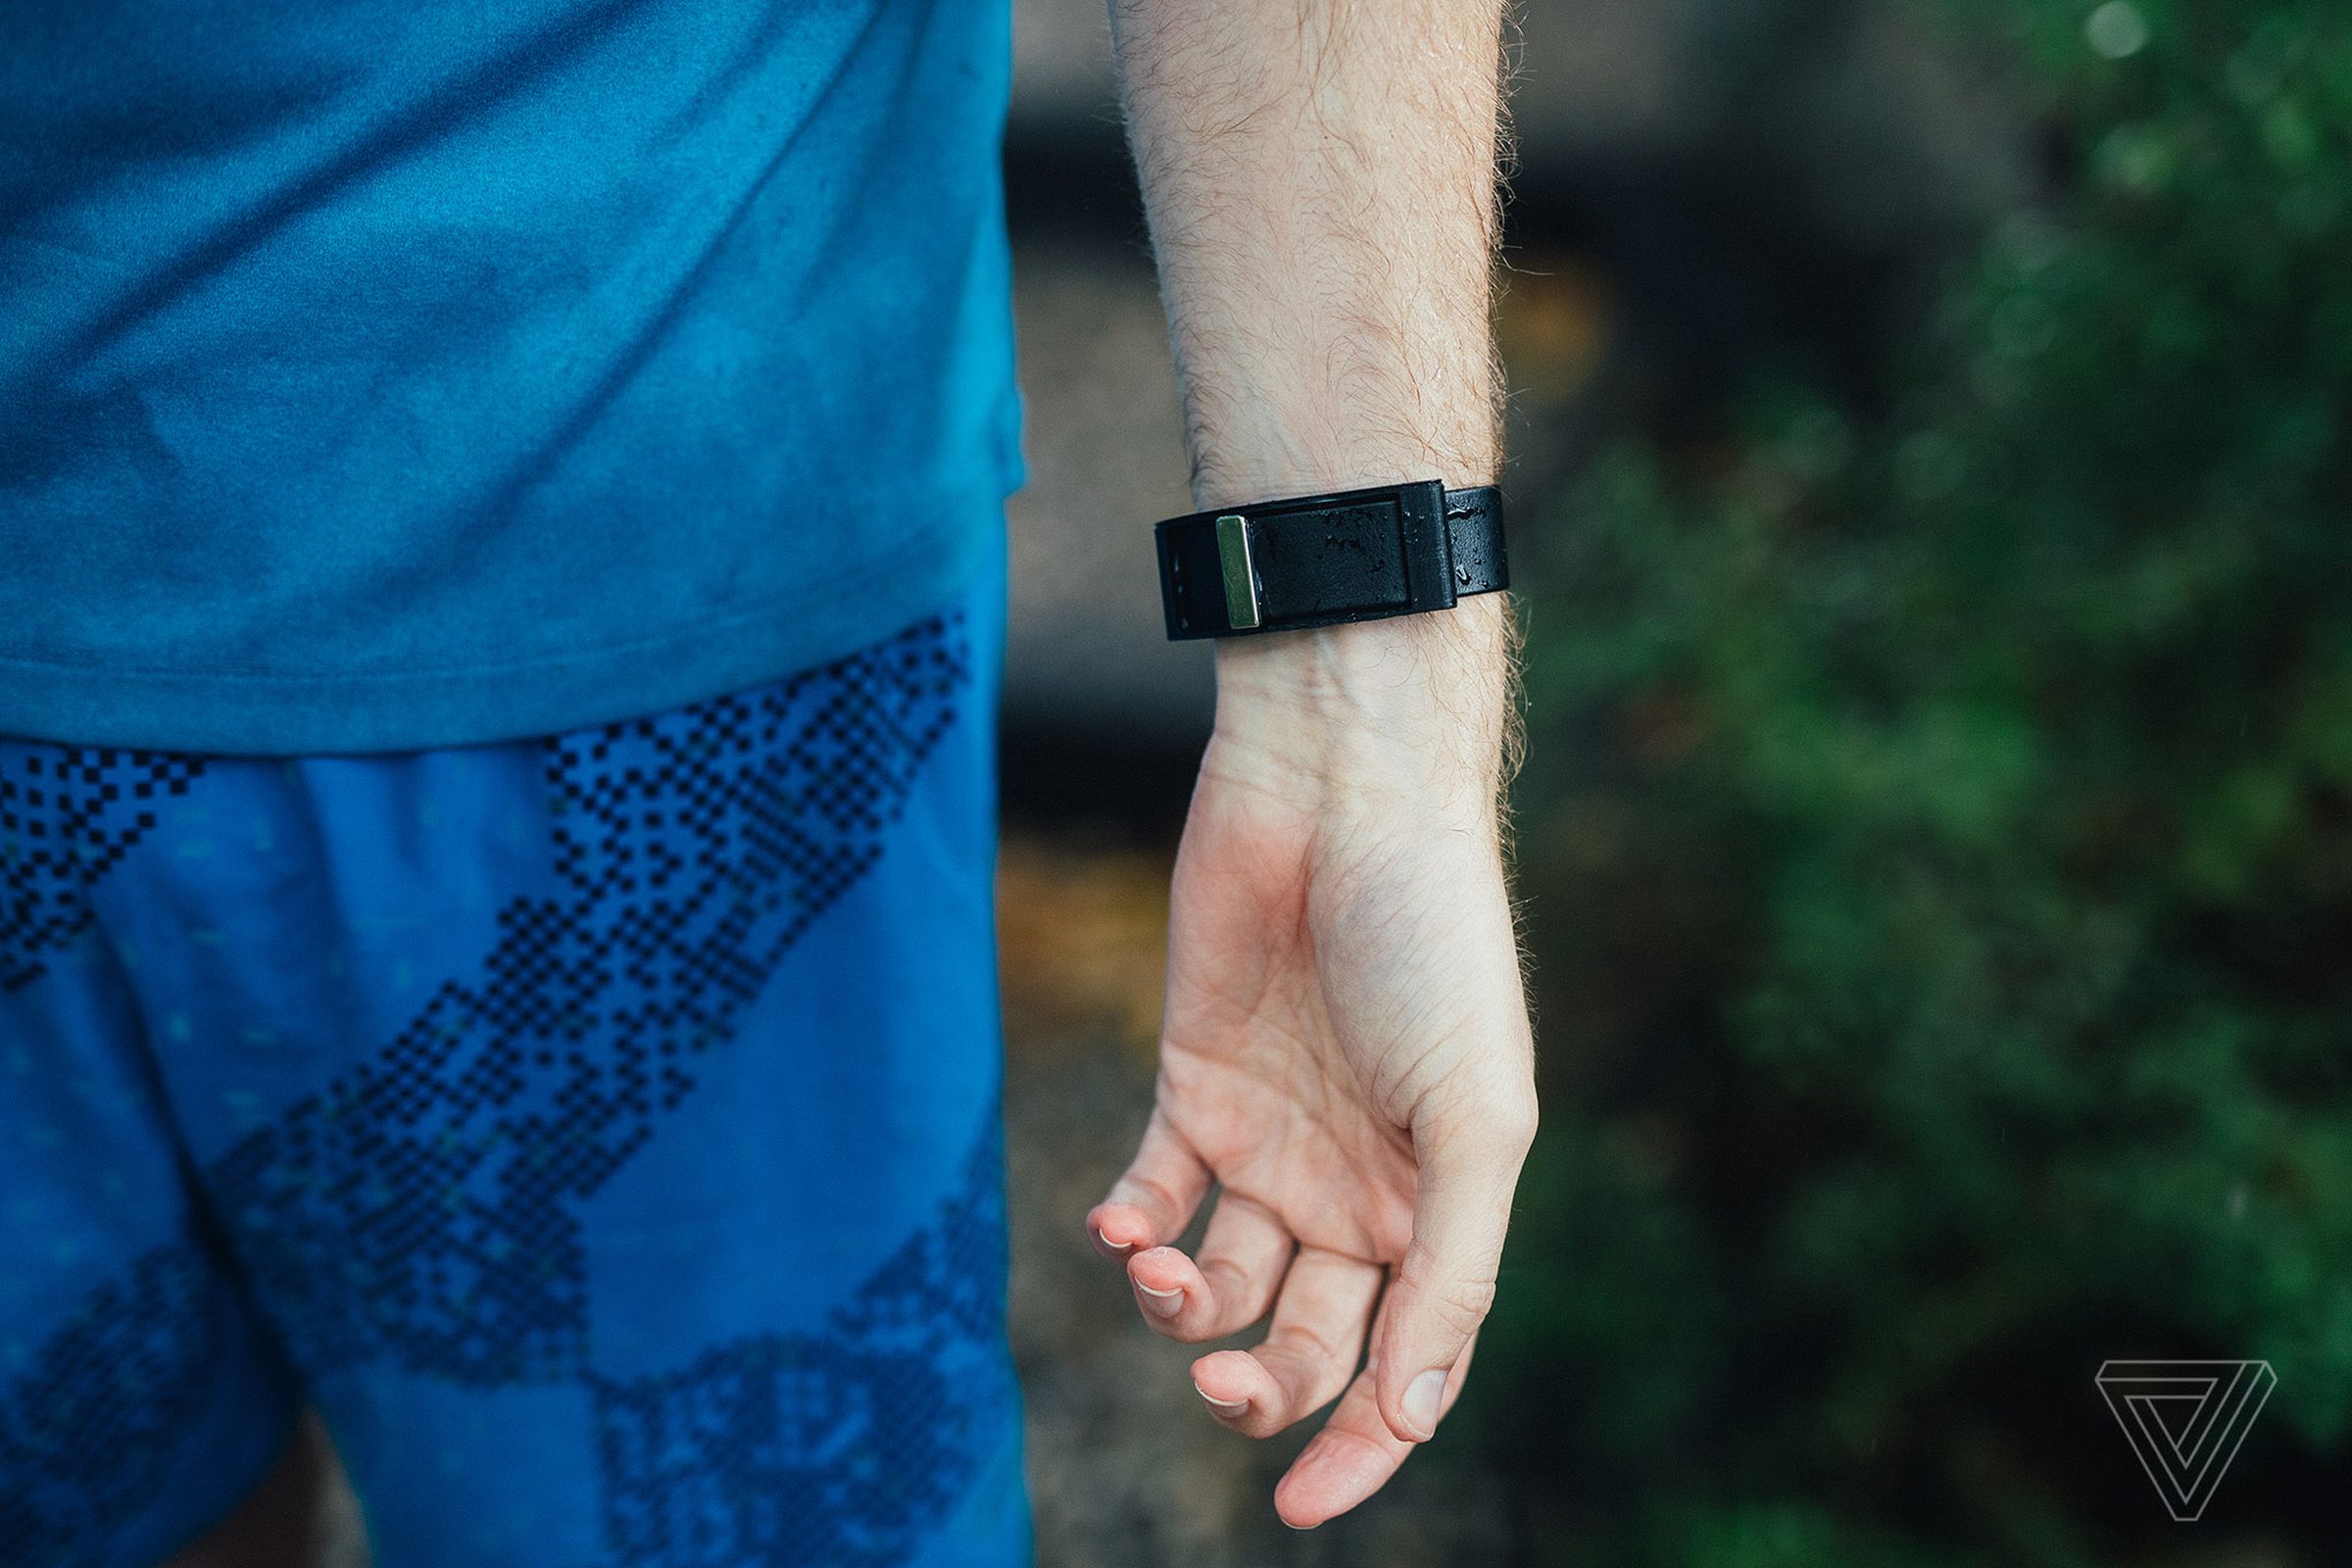 The wrist version of the Wayband, a piece of wearable tech that pairs with a user’s smartphone and utilizes GPS to create a map and route. Photo by Andrew White for The Verge